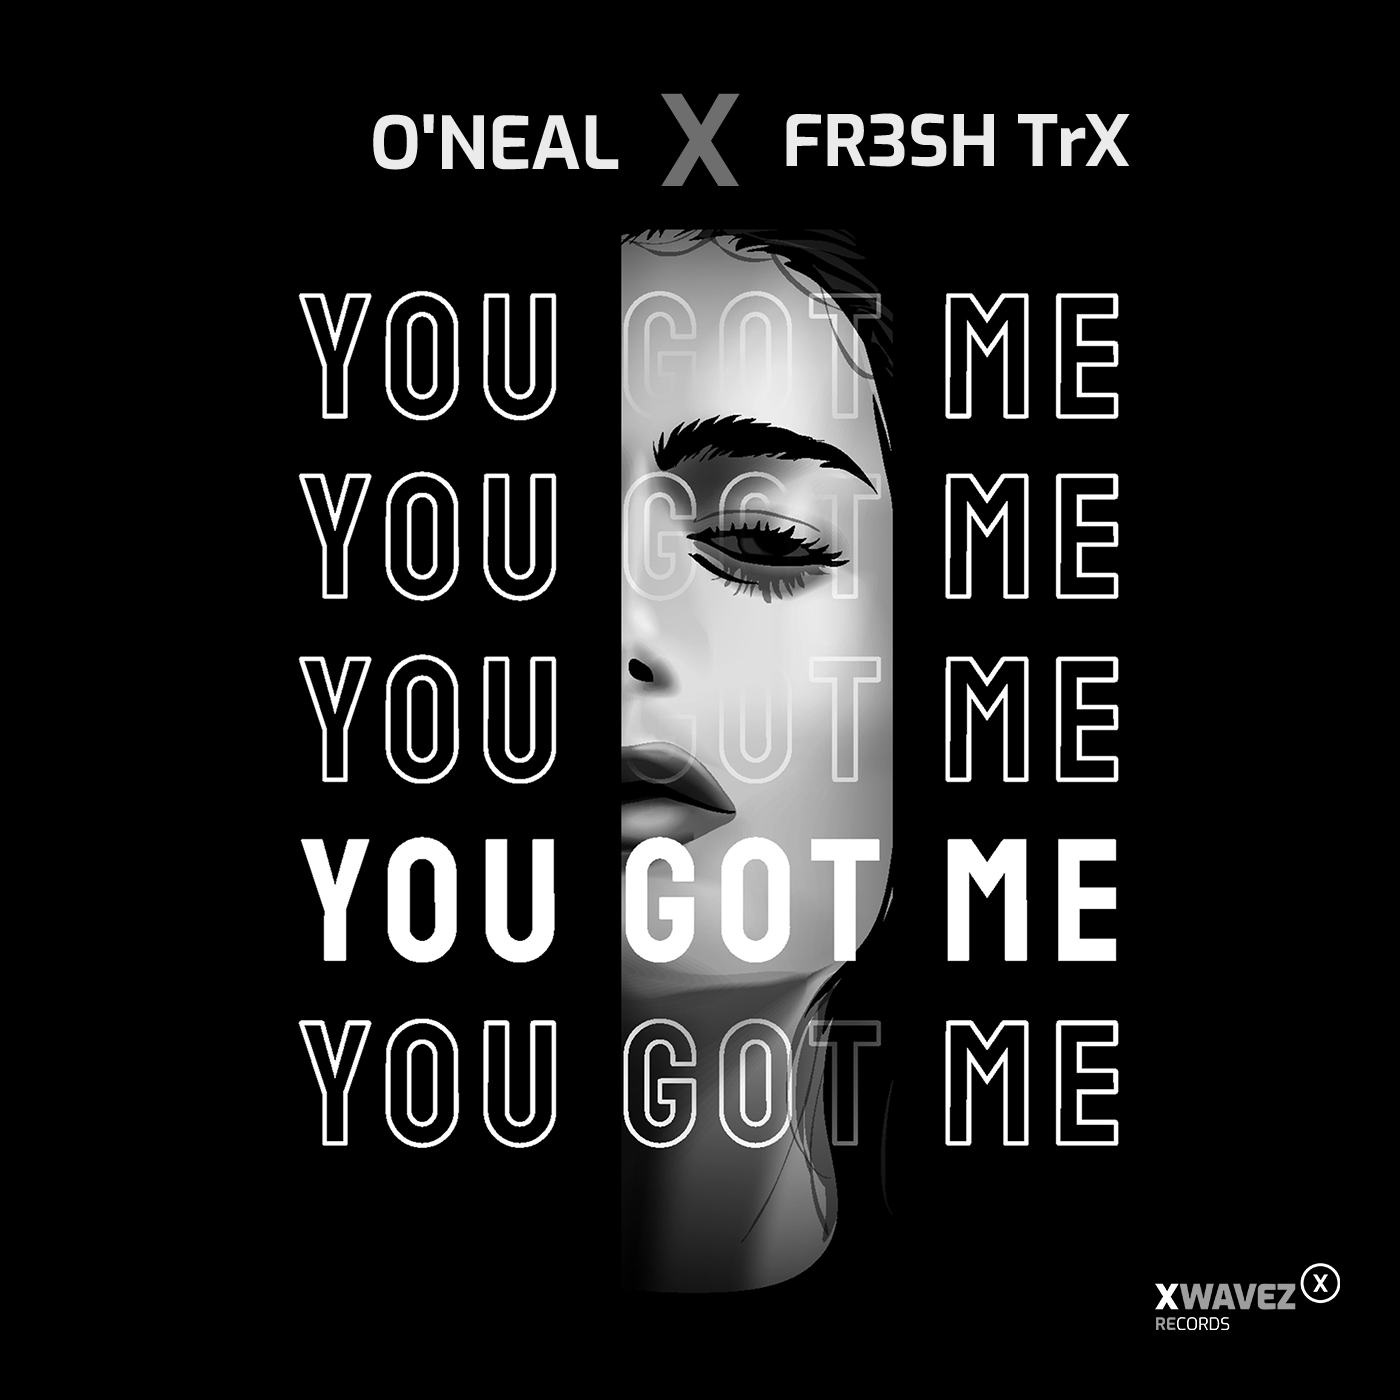 O‘ Neal x FR3SH TrX „You Got Me“ – strong together!